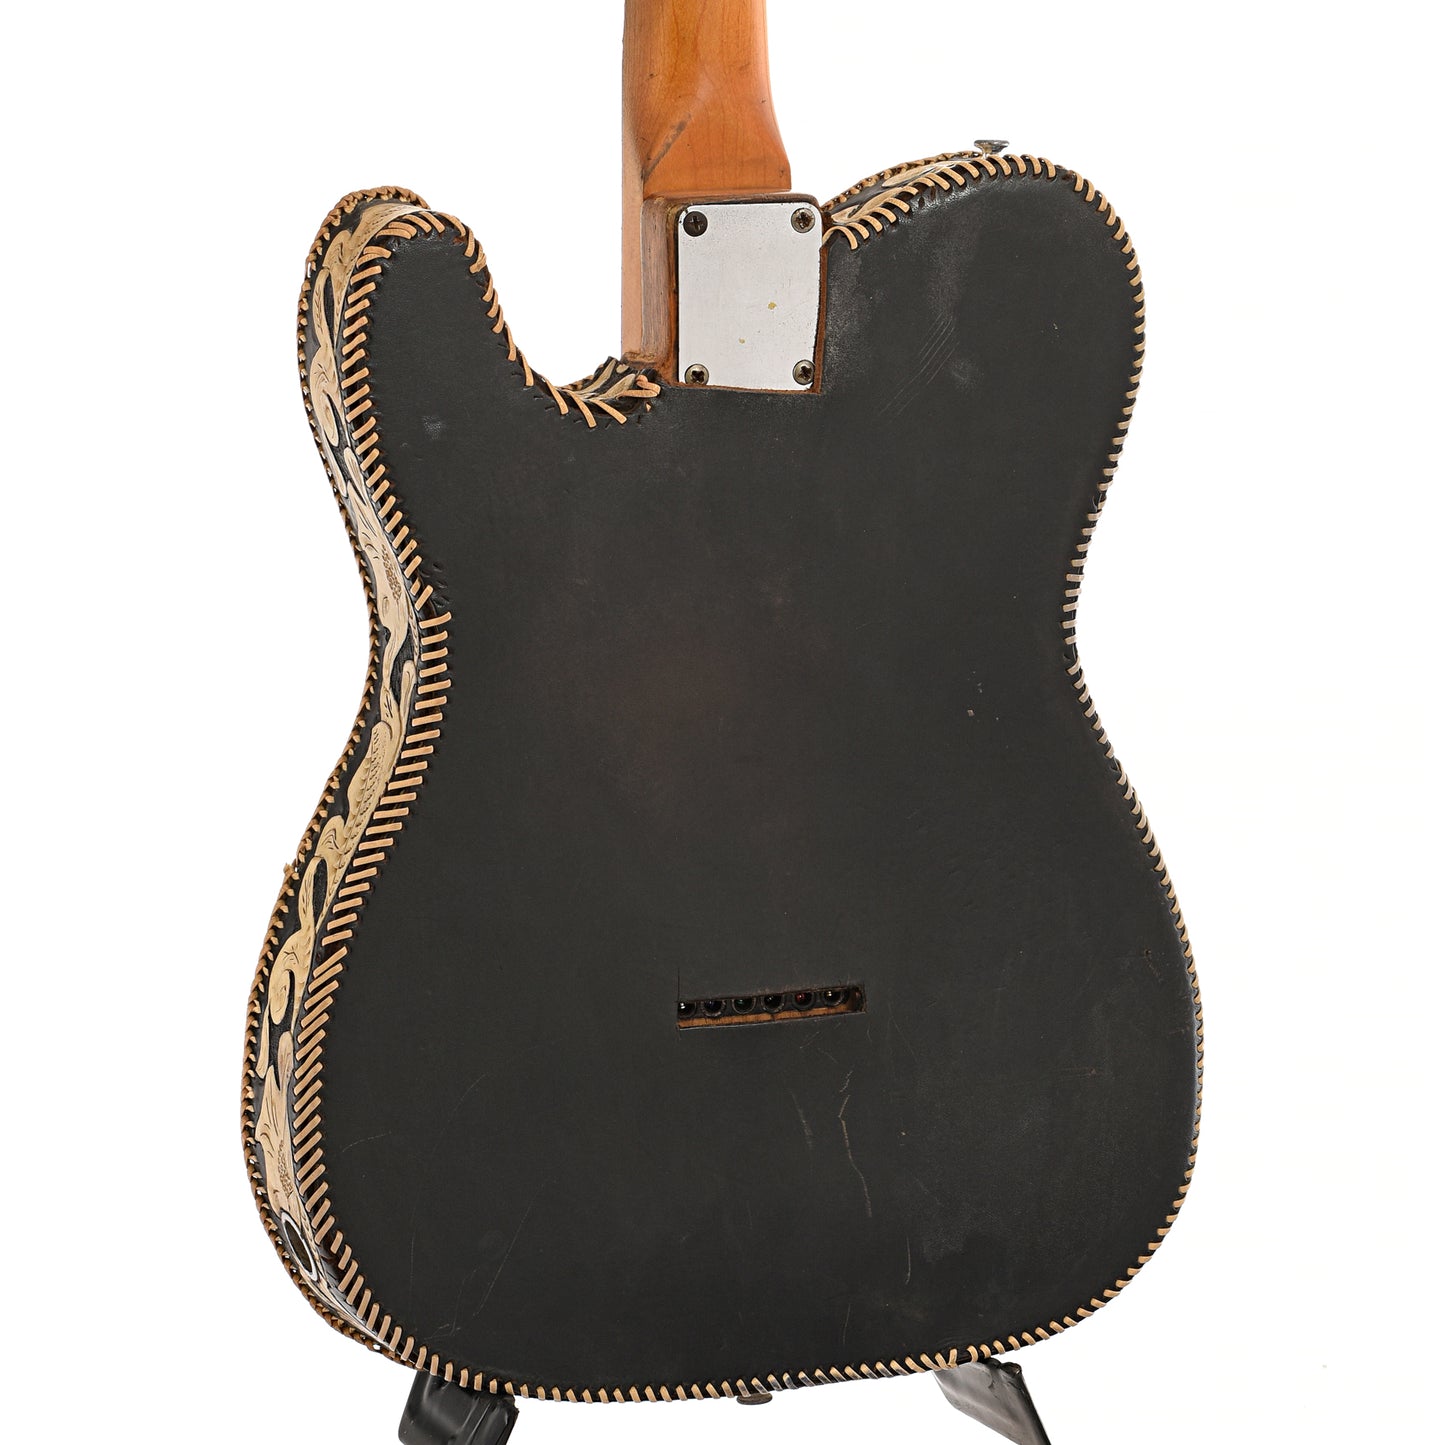 Back and side of Fender Parts Telecaster Electric Guitar (1952/1967)